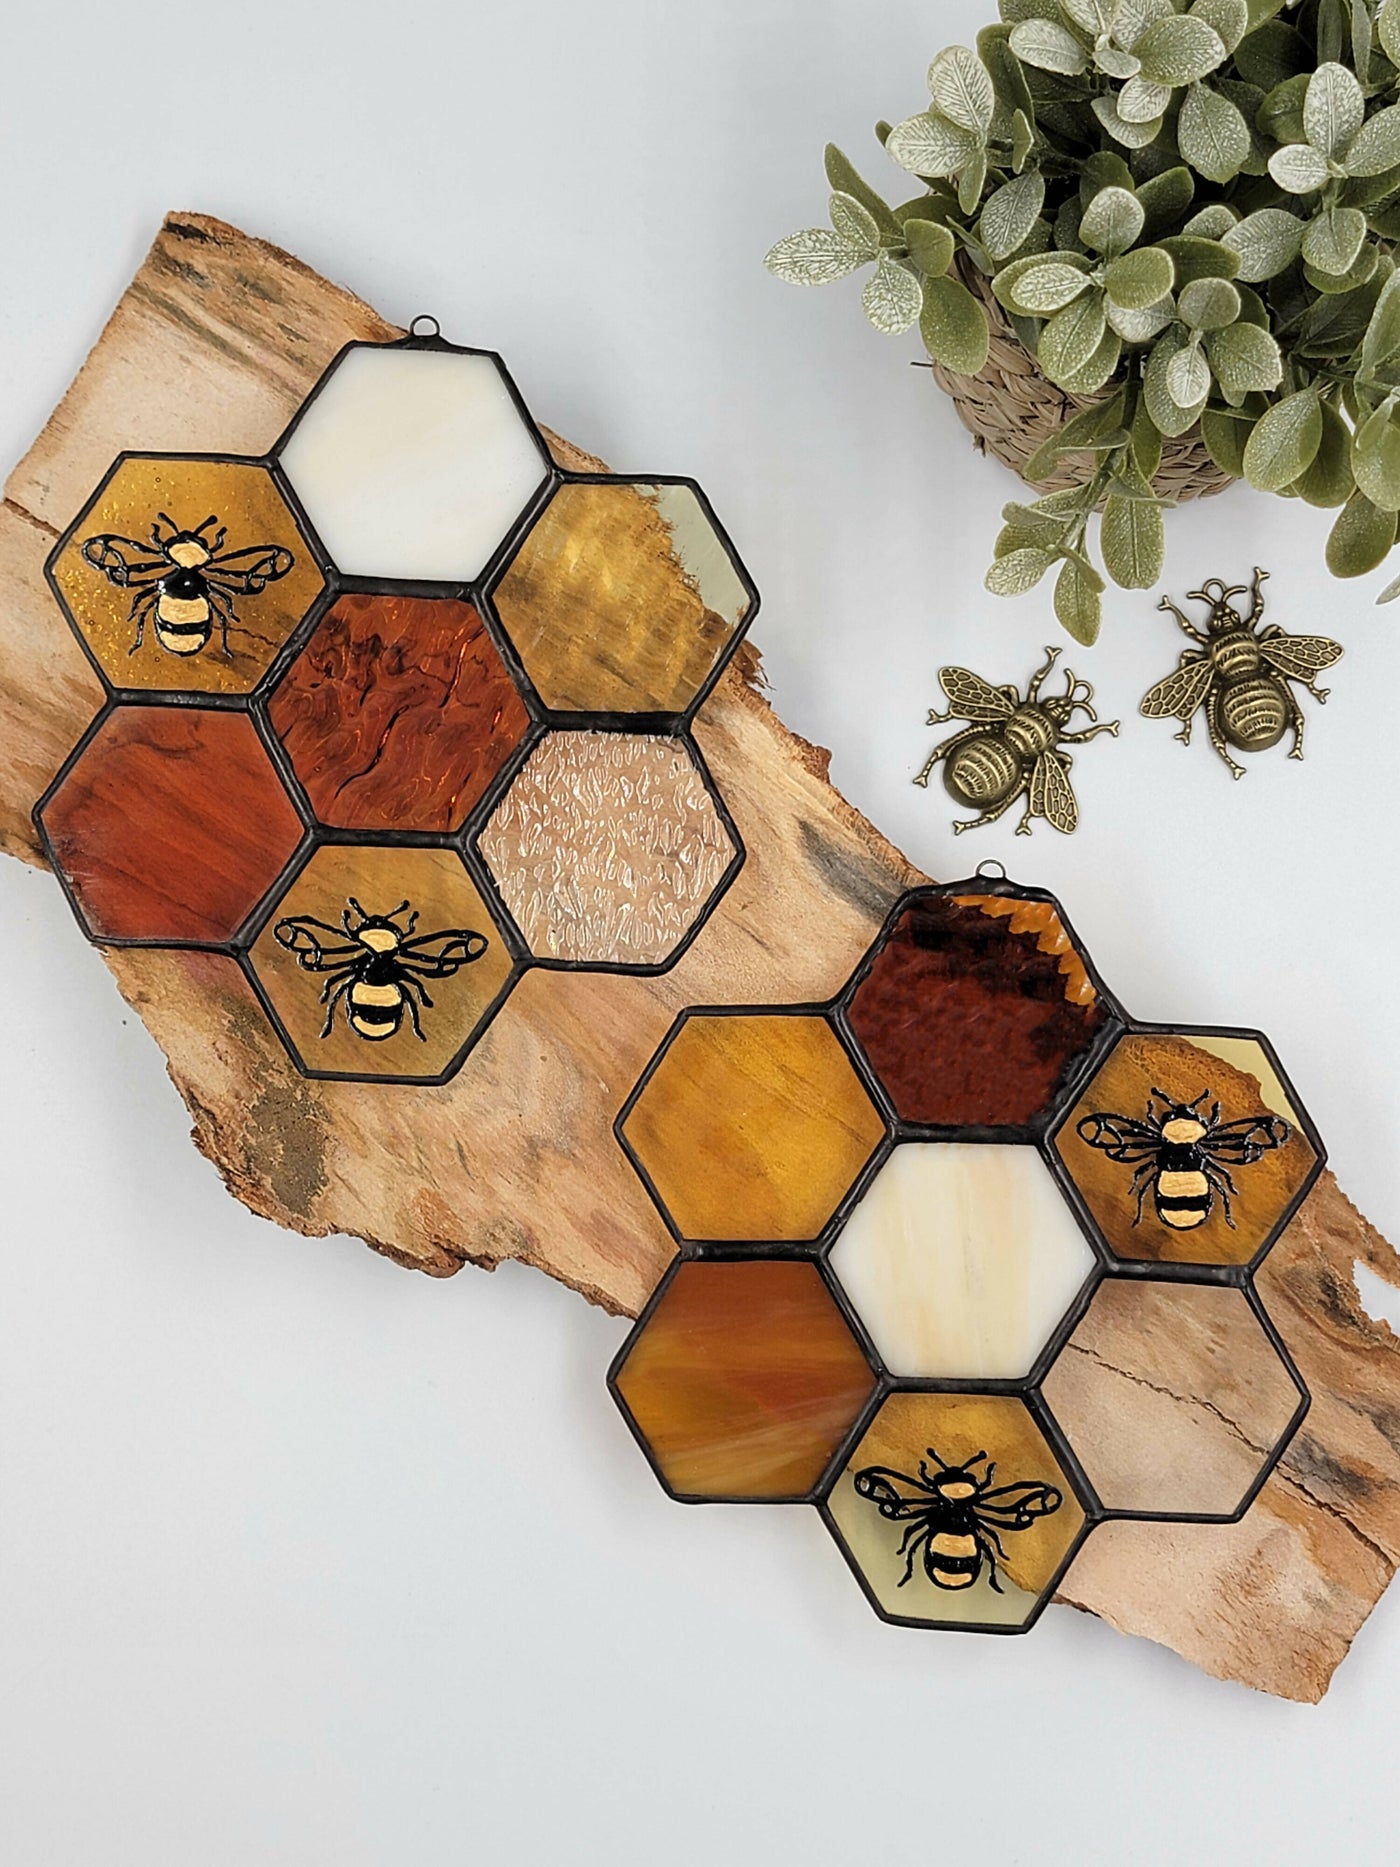 Stained Glass Hexagon Honeycomb